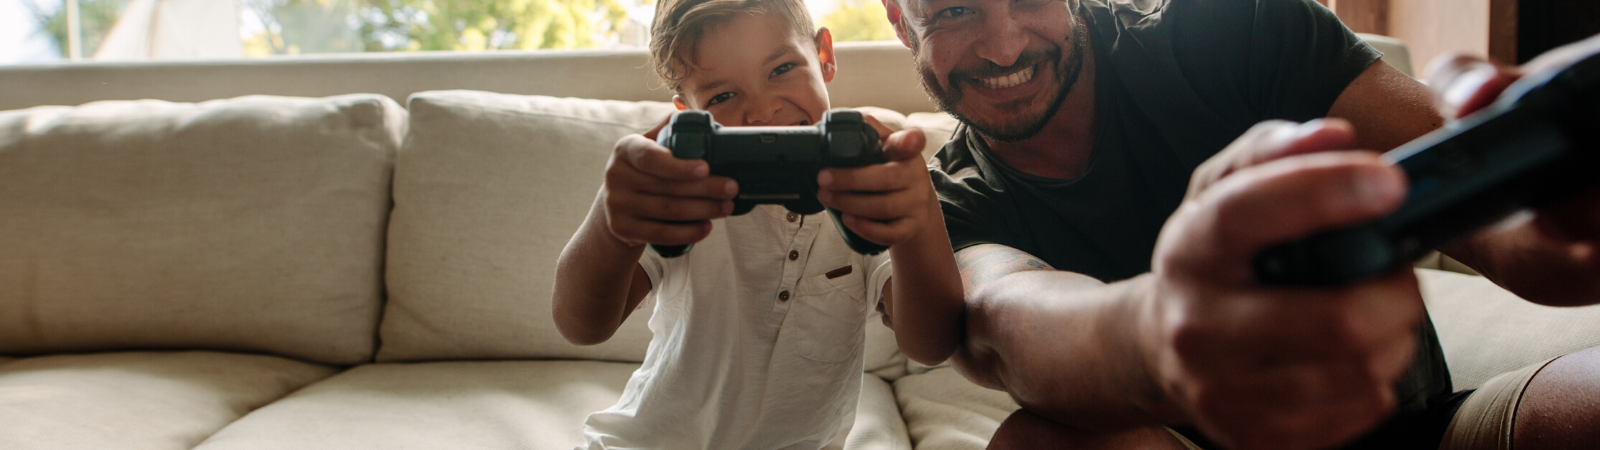 Dad and kid playing video games together on the couch